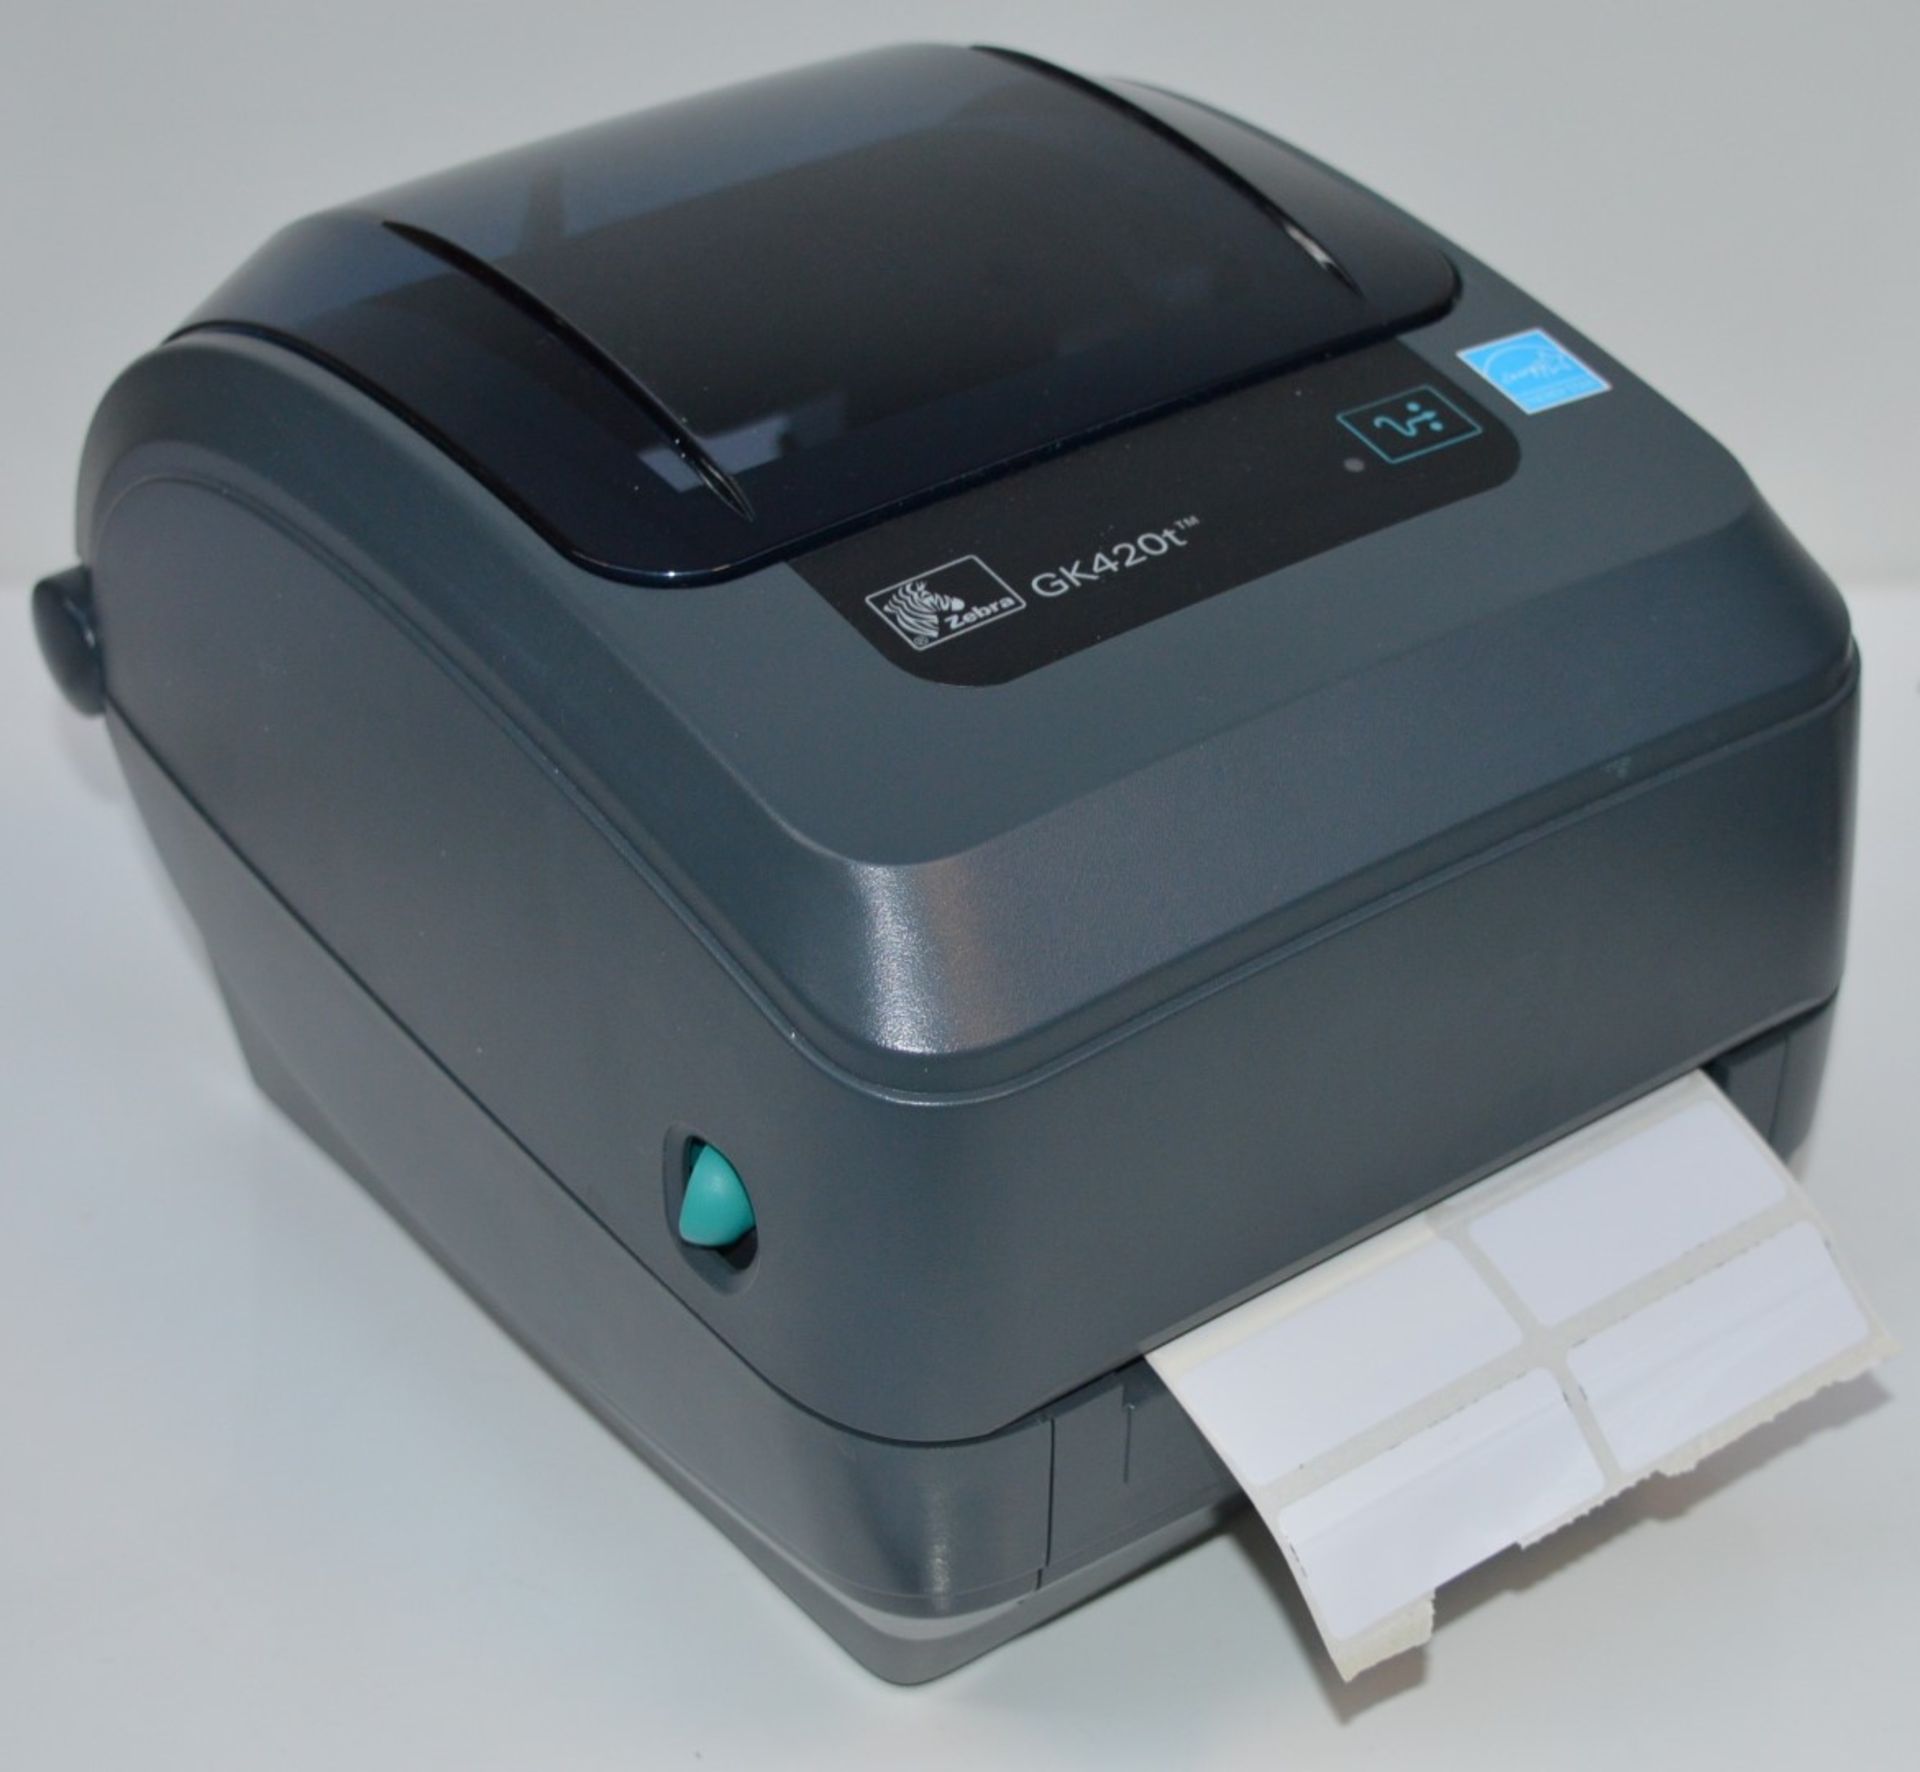 1 x Zebra GK420t Thermal Transfer Label Printer - USB & Serial Connectivity - Includes Cables - - Image 4 of 10